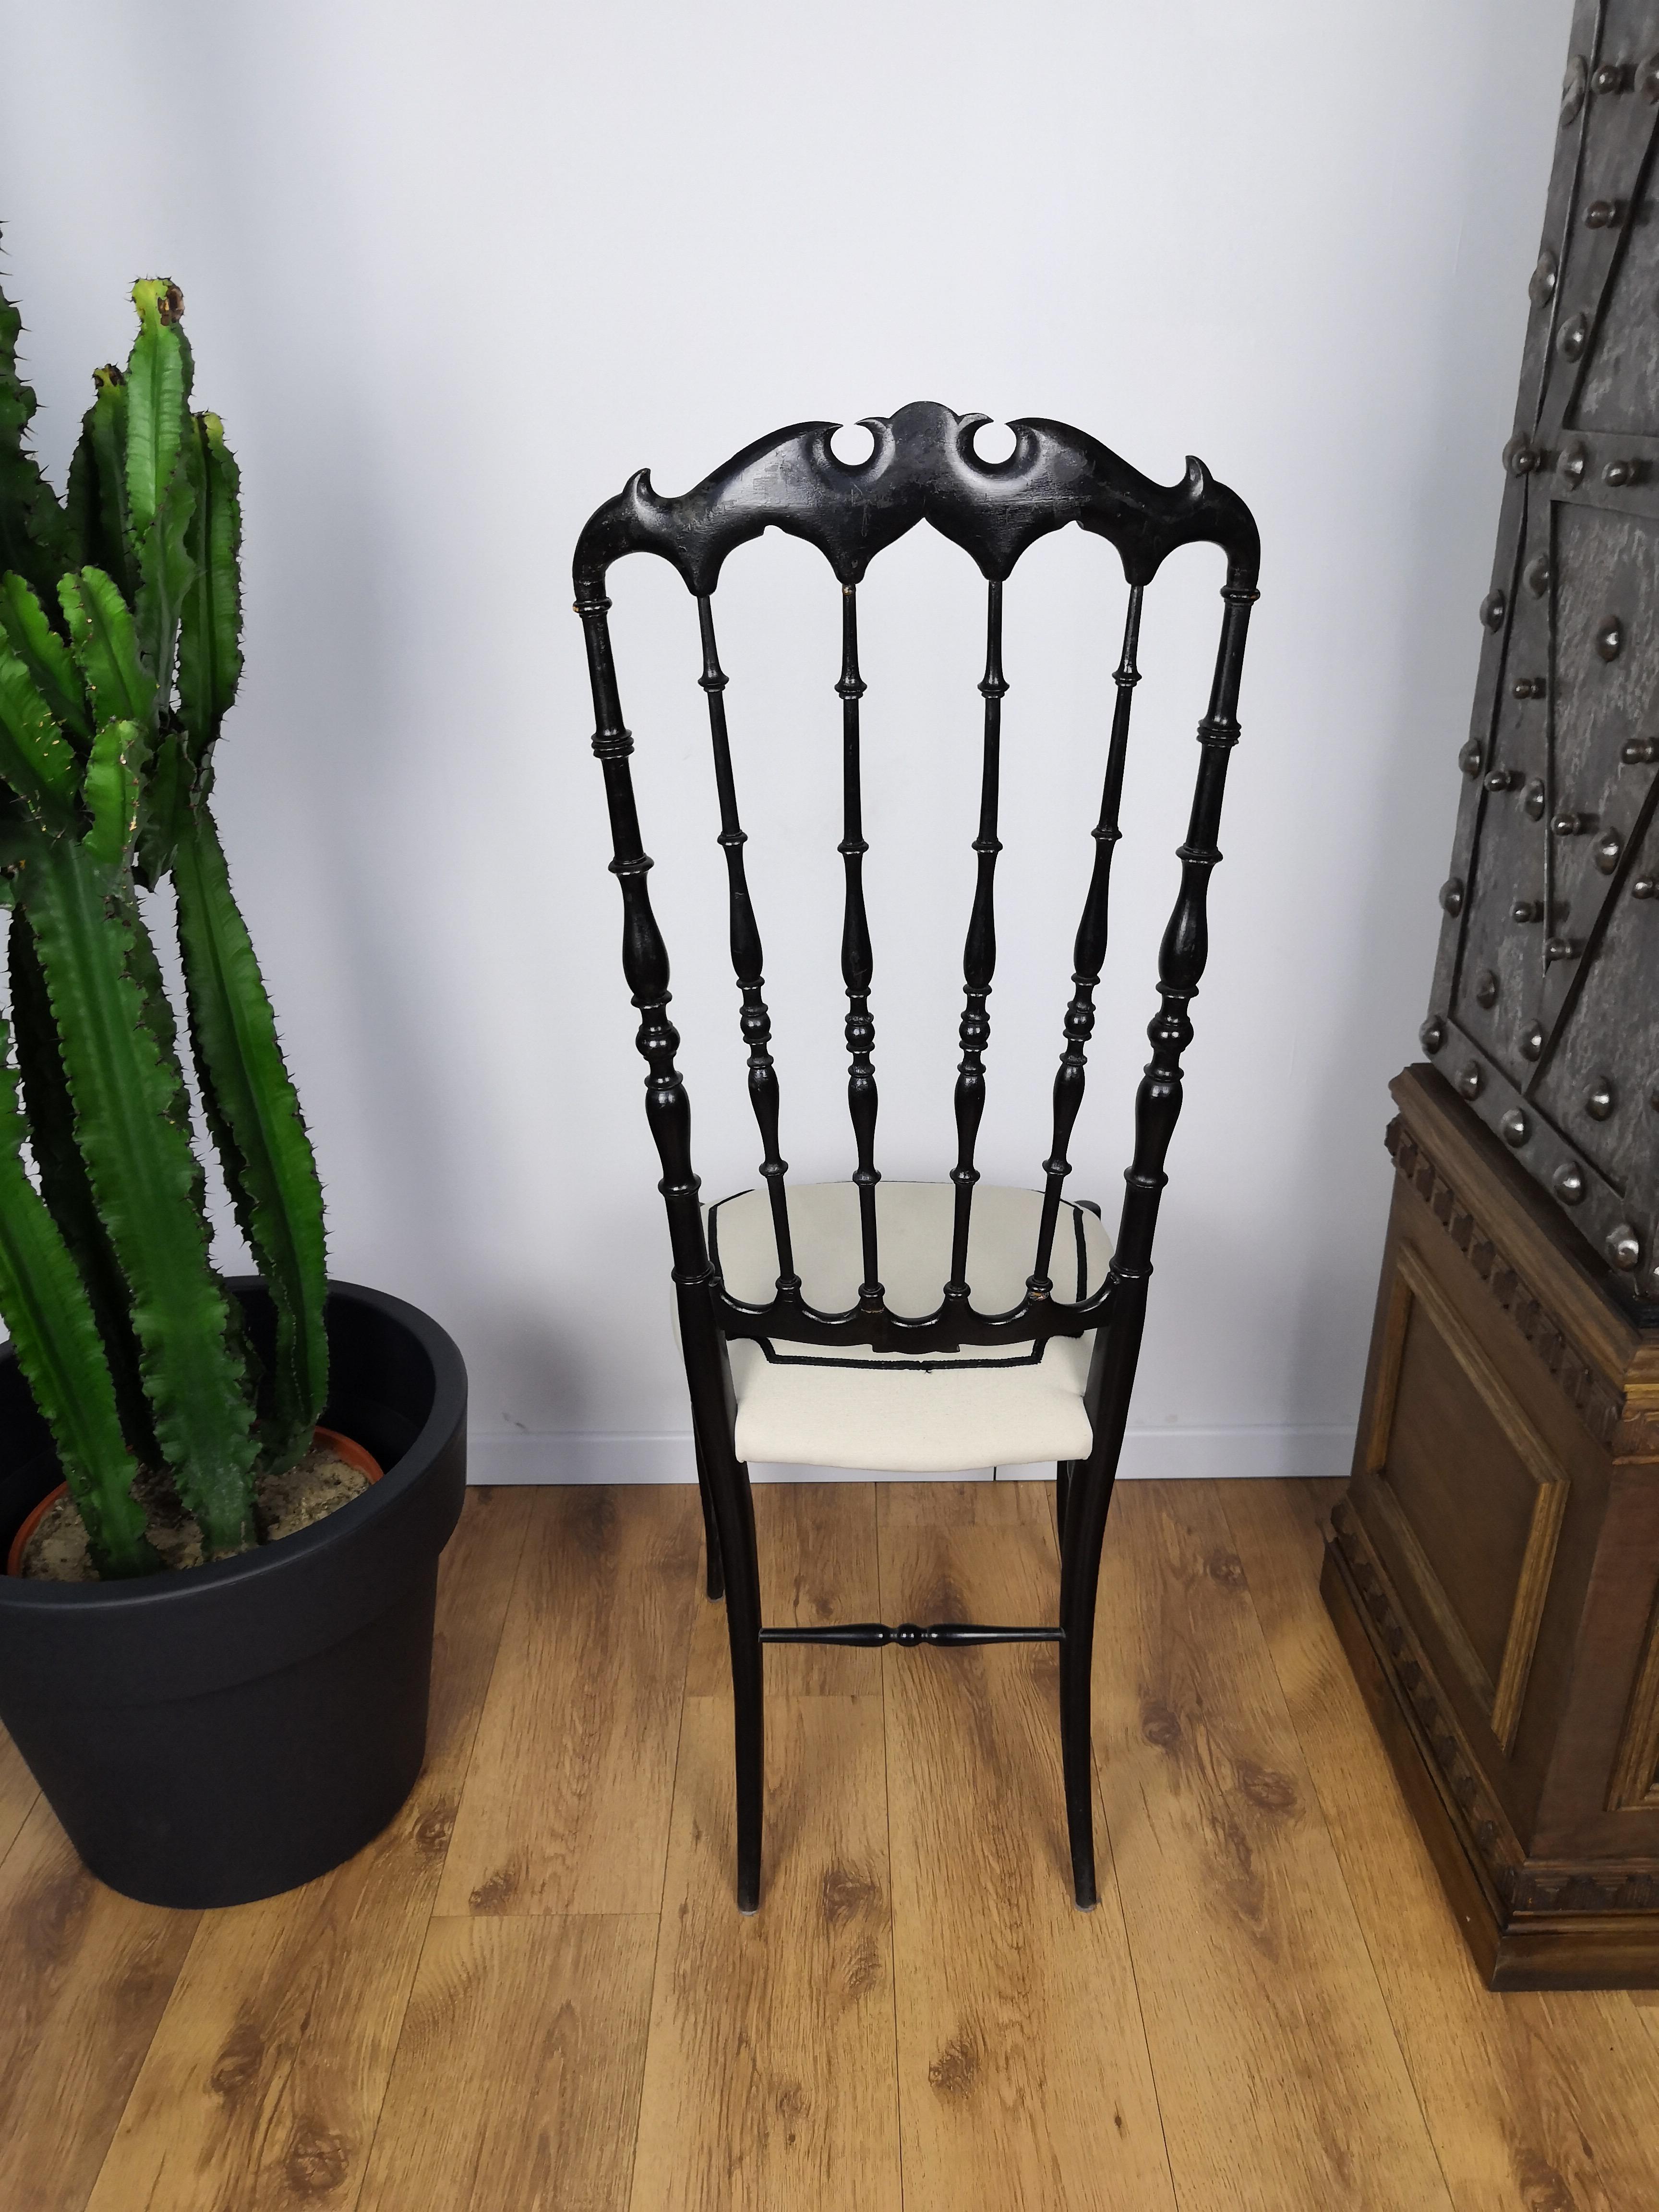 1970s Italian Carved Wood Black Chiavari Chair in Contemporary Modern Upholstery im Zustand „Gut“ in Carimate, Como